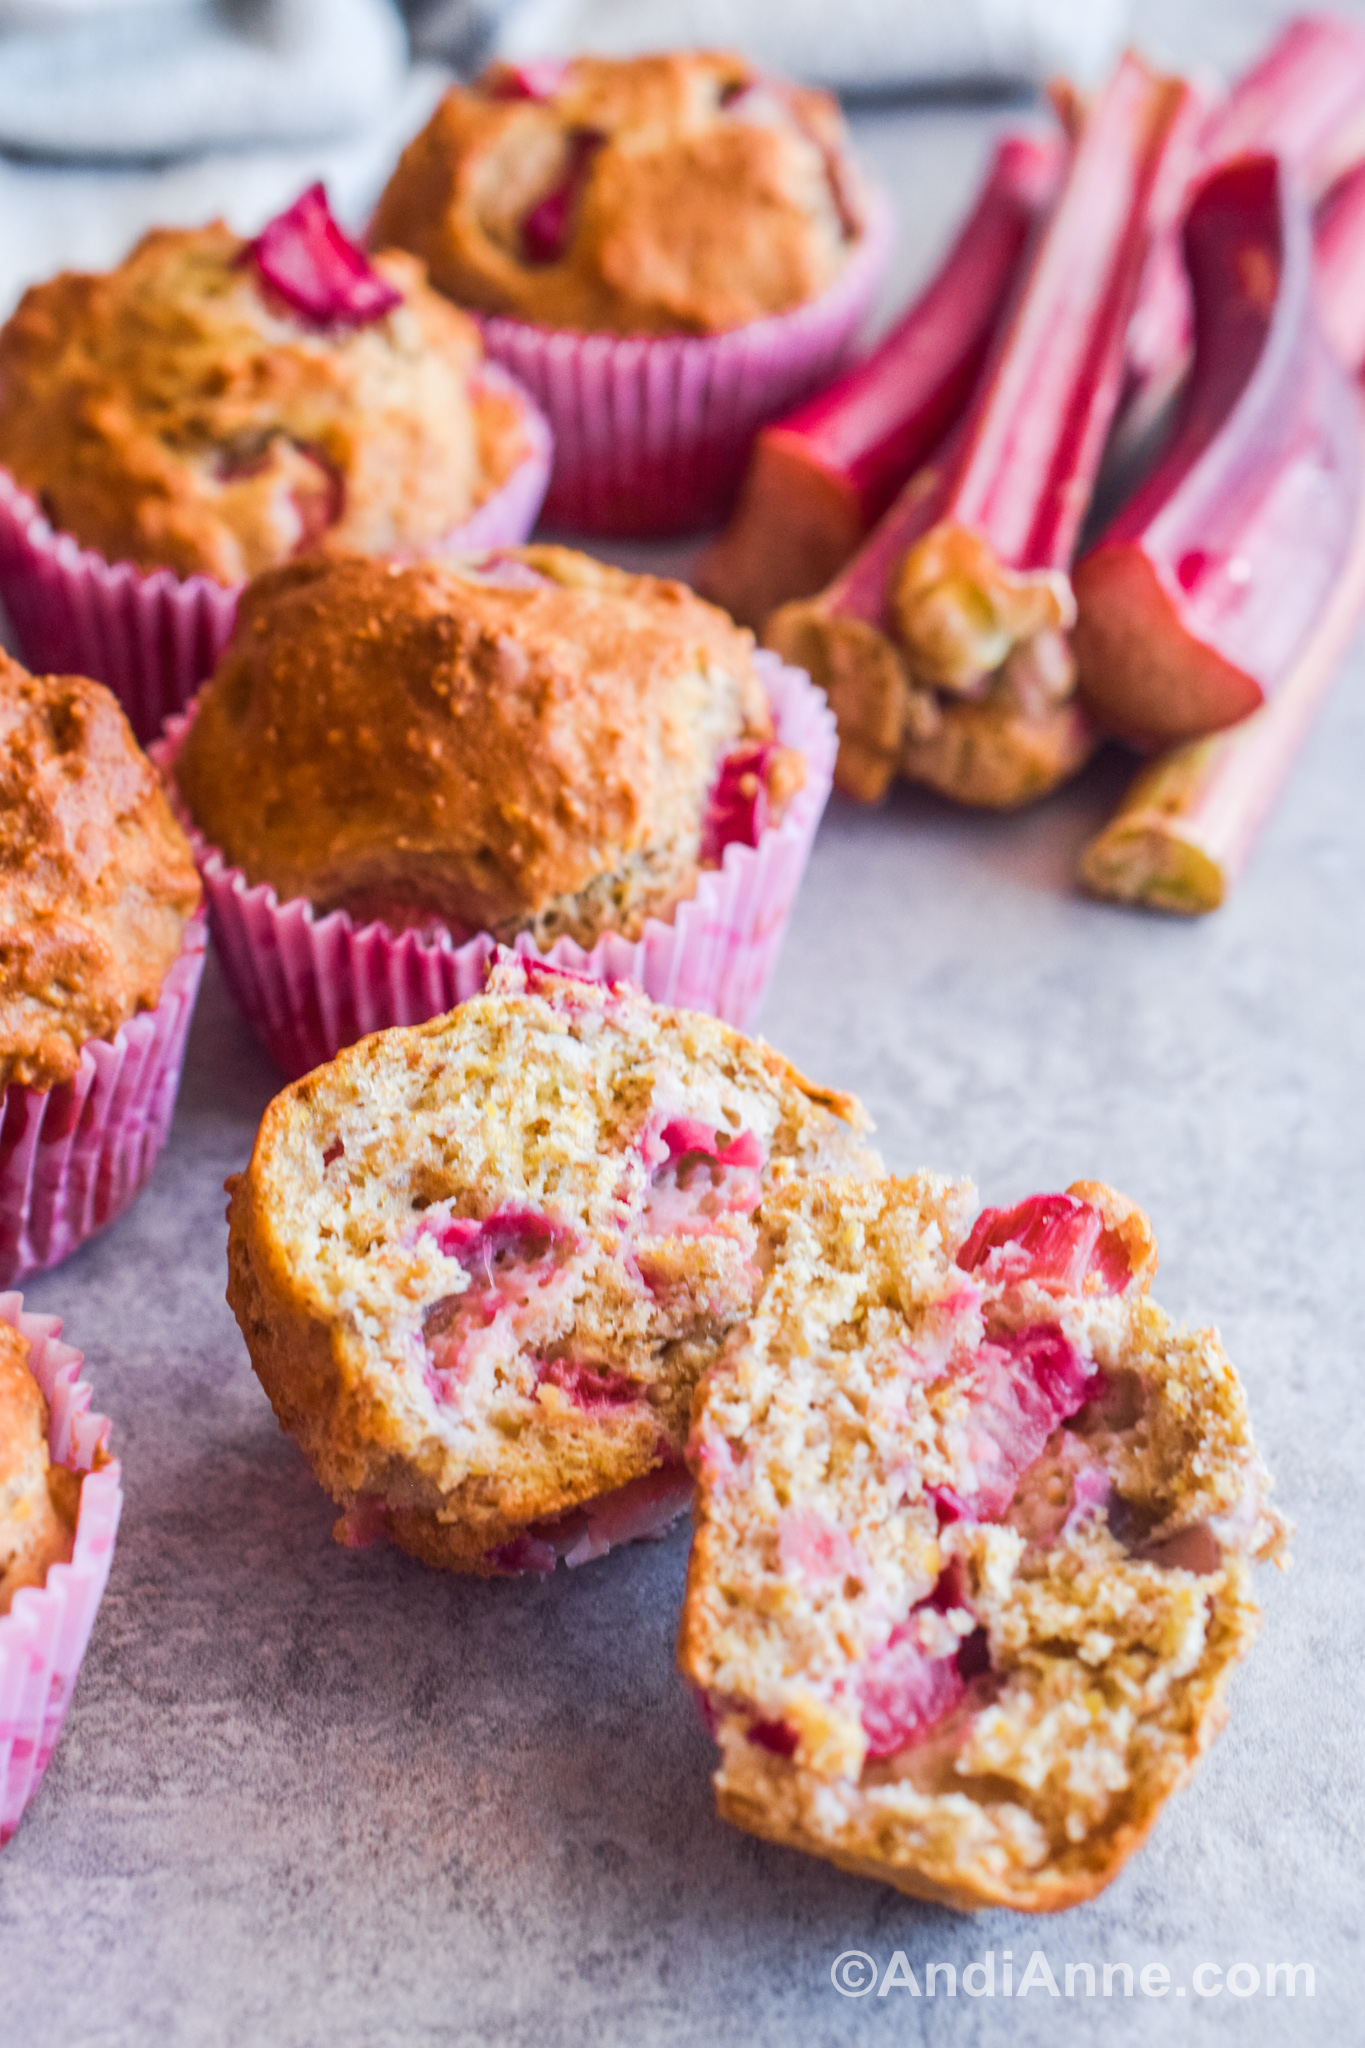 One rhubarb muffin sliced in half with more muffins and rhubarb sticks in background.